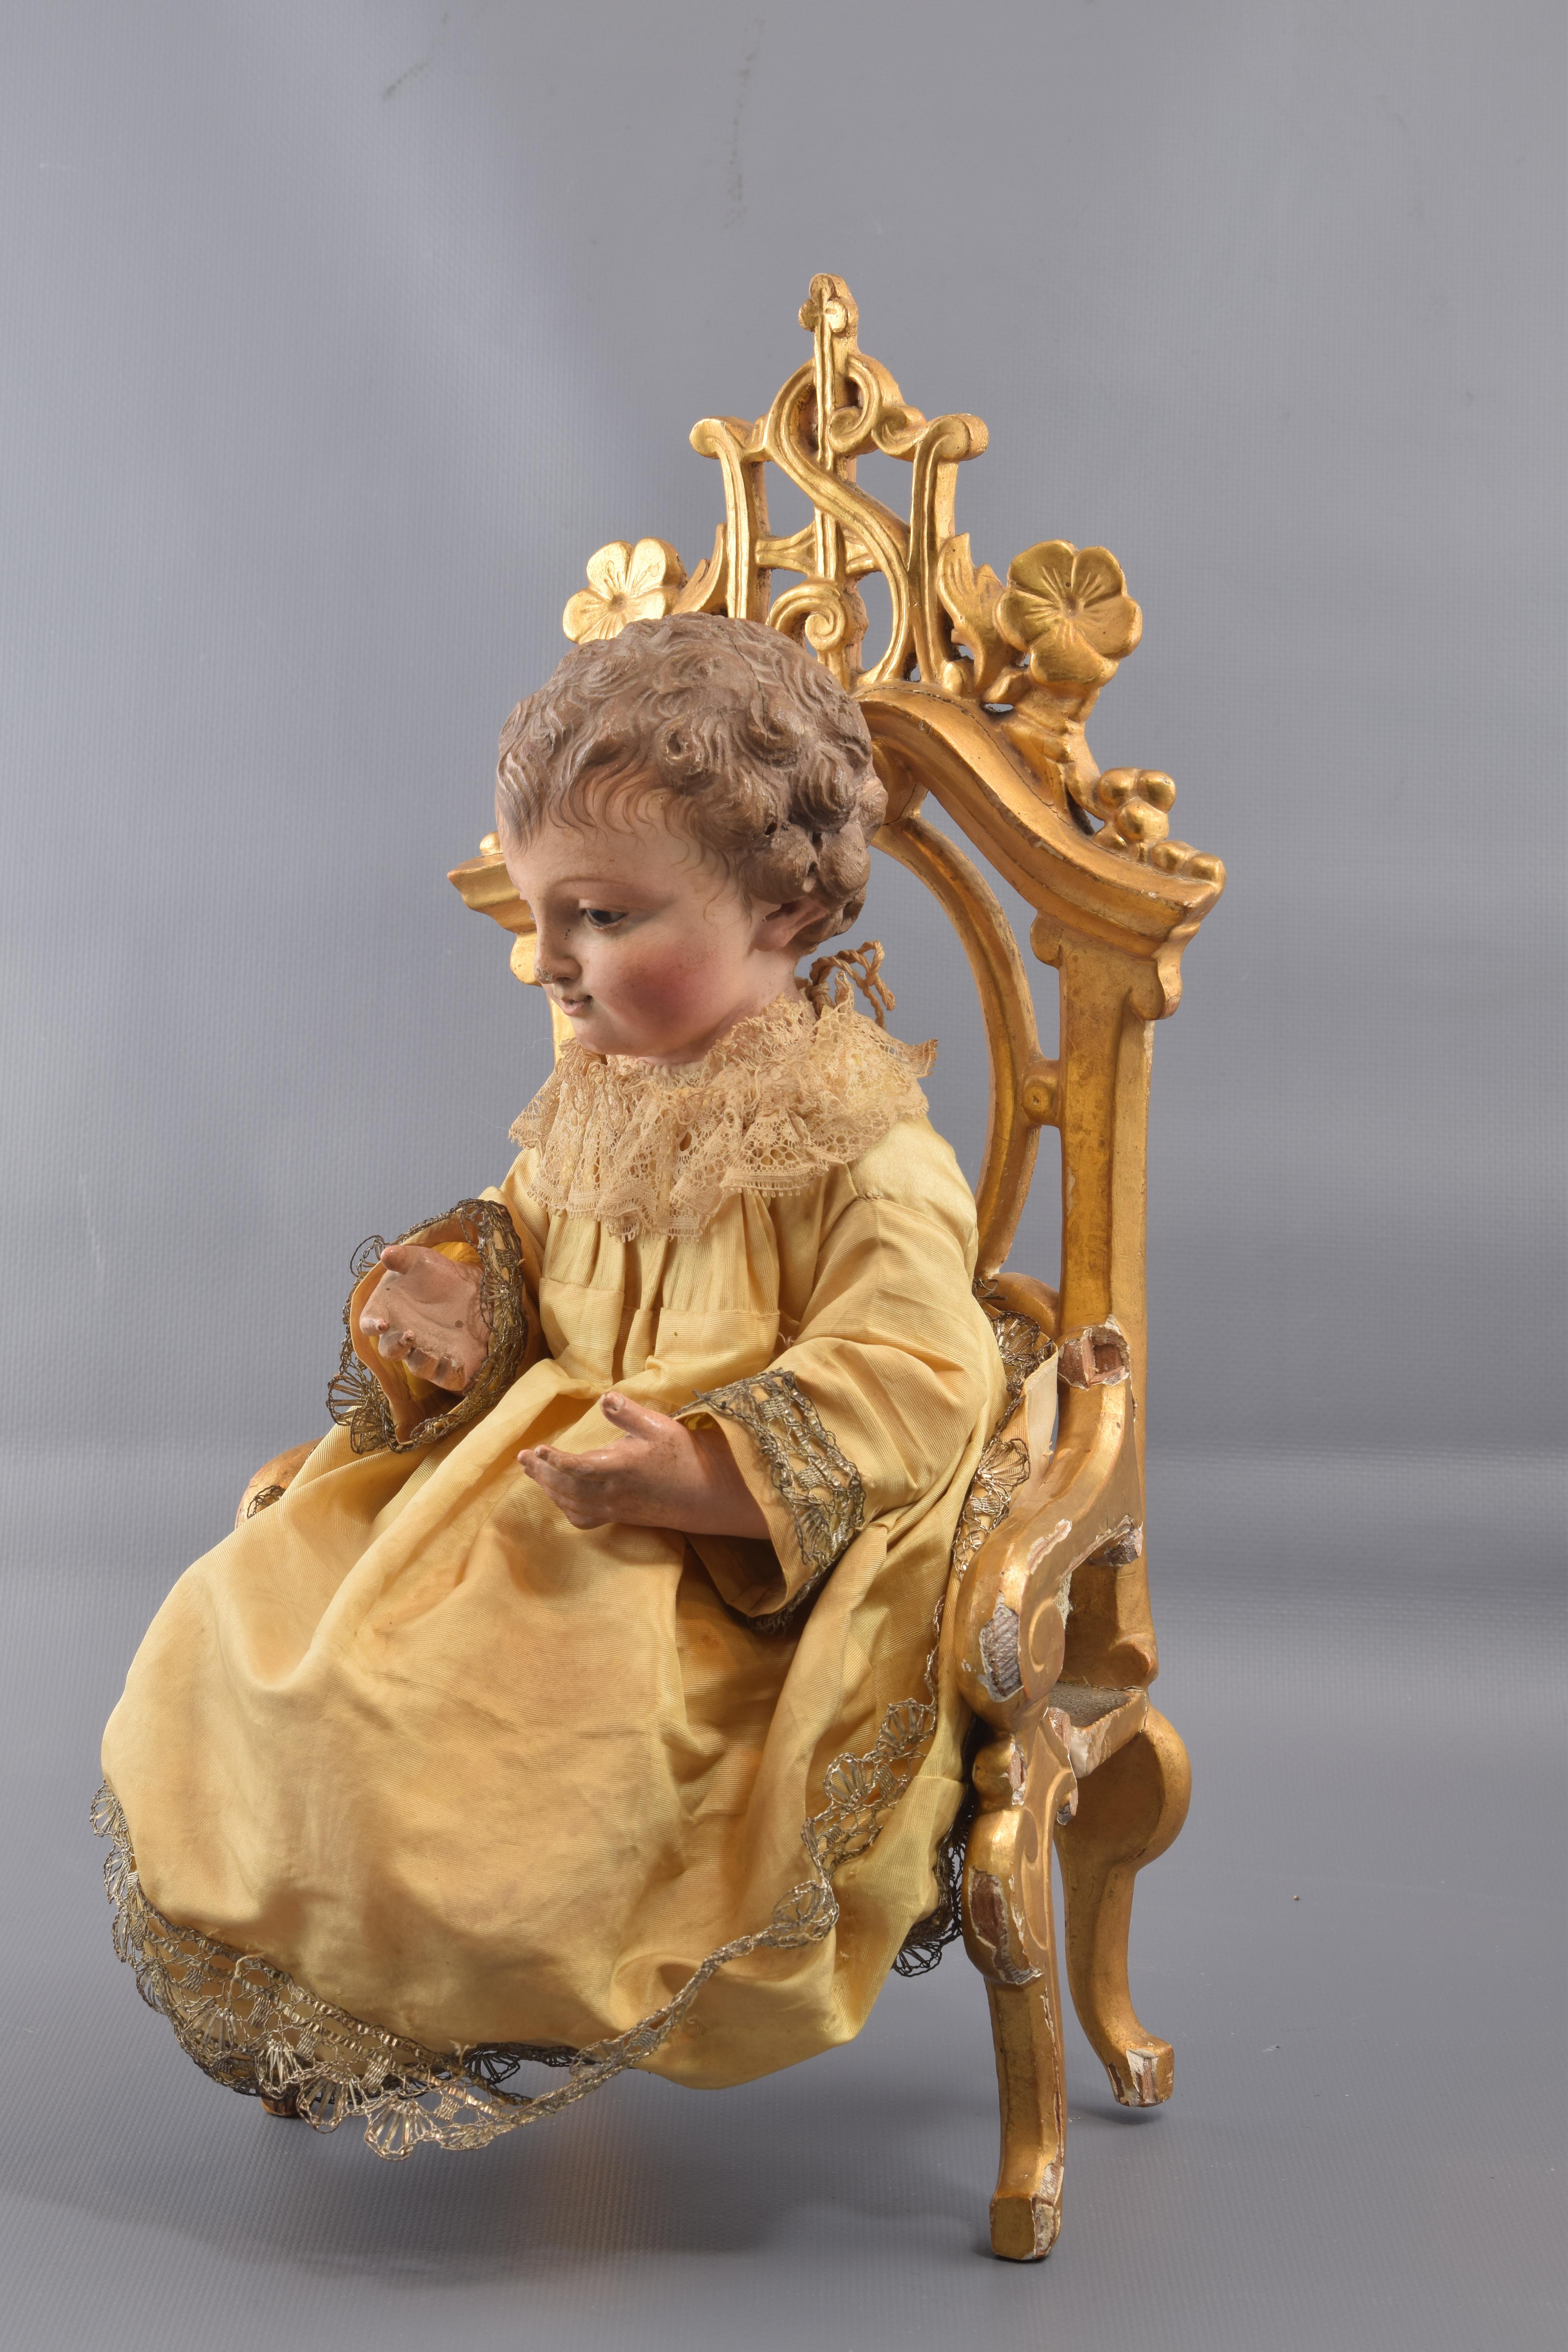 Child Jesus. Polychrome wood, giltwood, textile, metal, etc., Spain, 19th century
Baby Jesus dressed in carved and polychrome wood sitting on a high-backed throne (decorated with flowers, Classic shapes, cabriolet legs and flower pomp highlighting